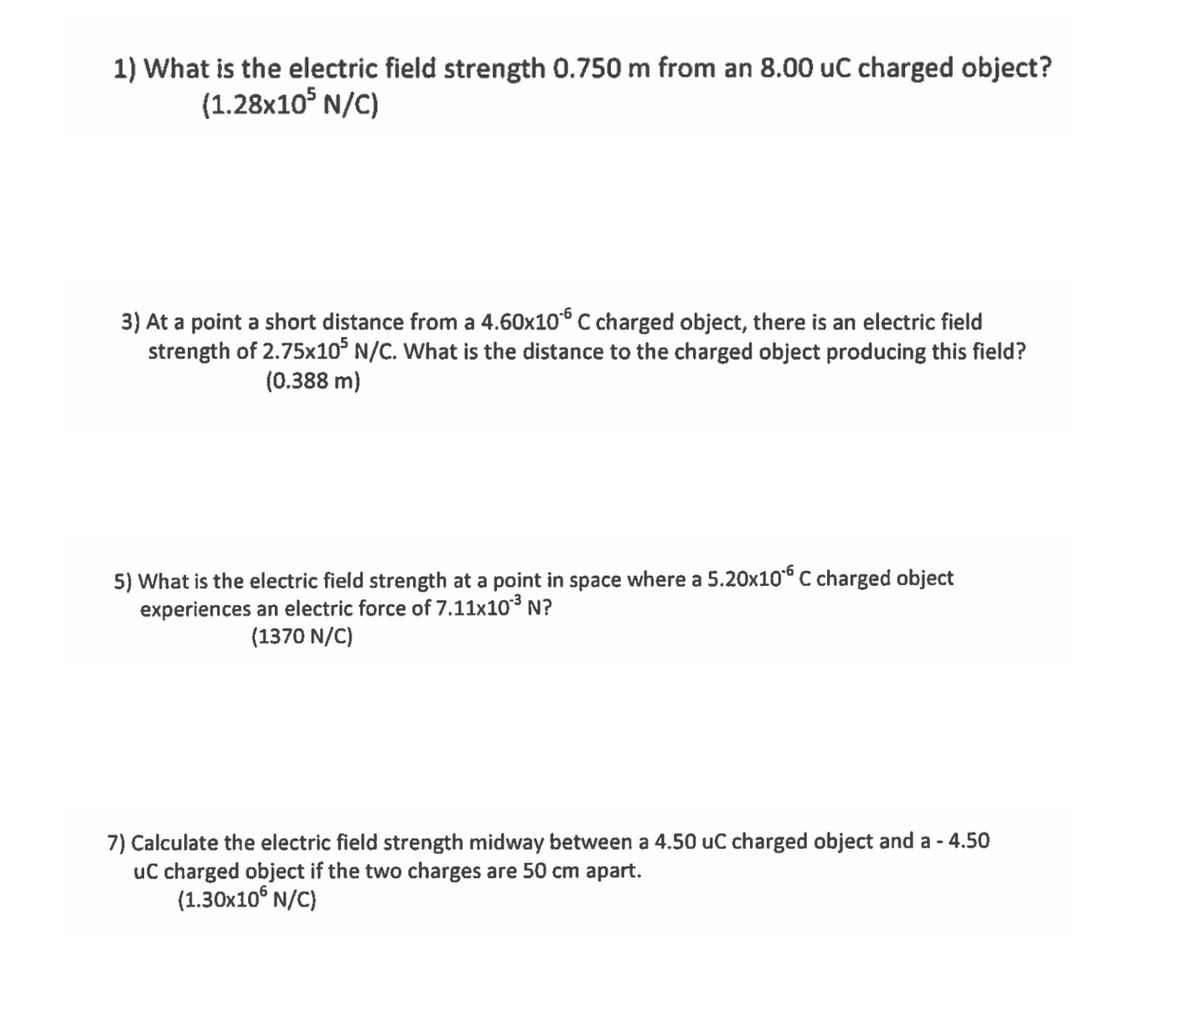 1) What is the electric field strength 0.750 m from an 8.00 uC charged object?
(1.28x10° N/C)
3) At a point a short distance from a 4.60x10° C charged object, there is an electric field
strength of 2.75x1o° N/C. What is the distance to the charged object producing this field?
(0.388 m)
5) What is the electric field strength at a point in space where a 5.20x10“ C charged object
experiences an electric force of 7.11x10³ N?
(1370 N/C)
7) Calculate the electric field strength midway between a 4.50 uC charged object and a - 4.50
uC charged object if the two charges are 50 cm apart.
(1.30x10° N/C)
